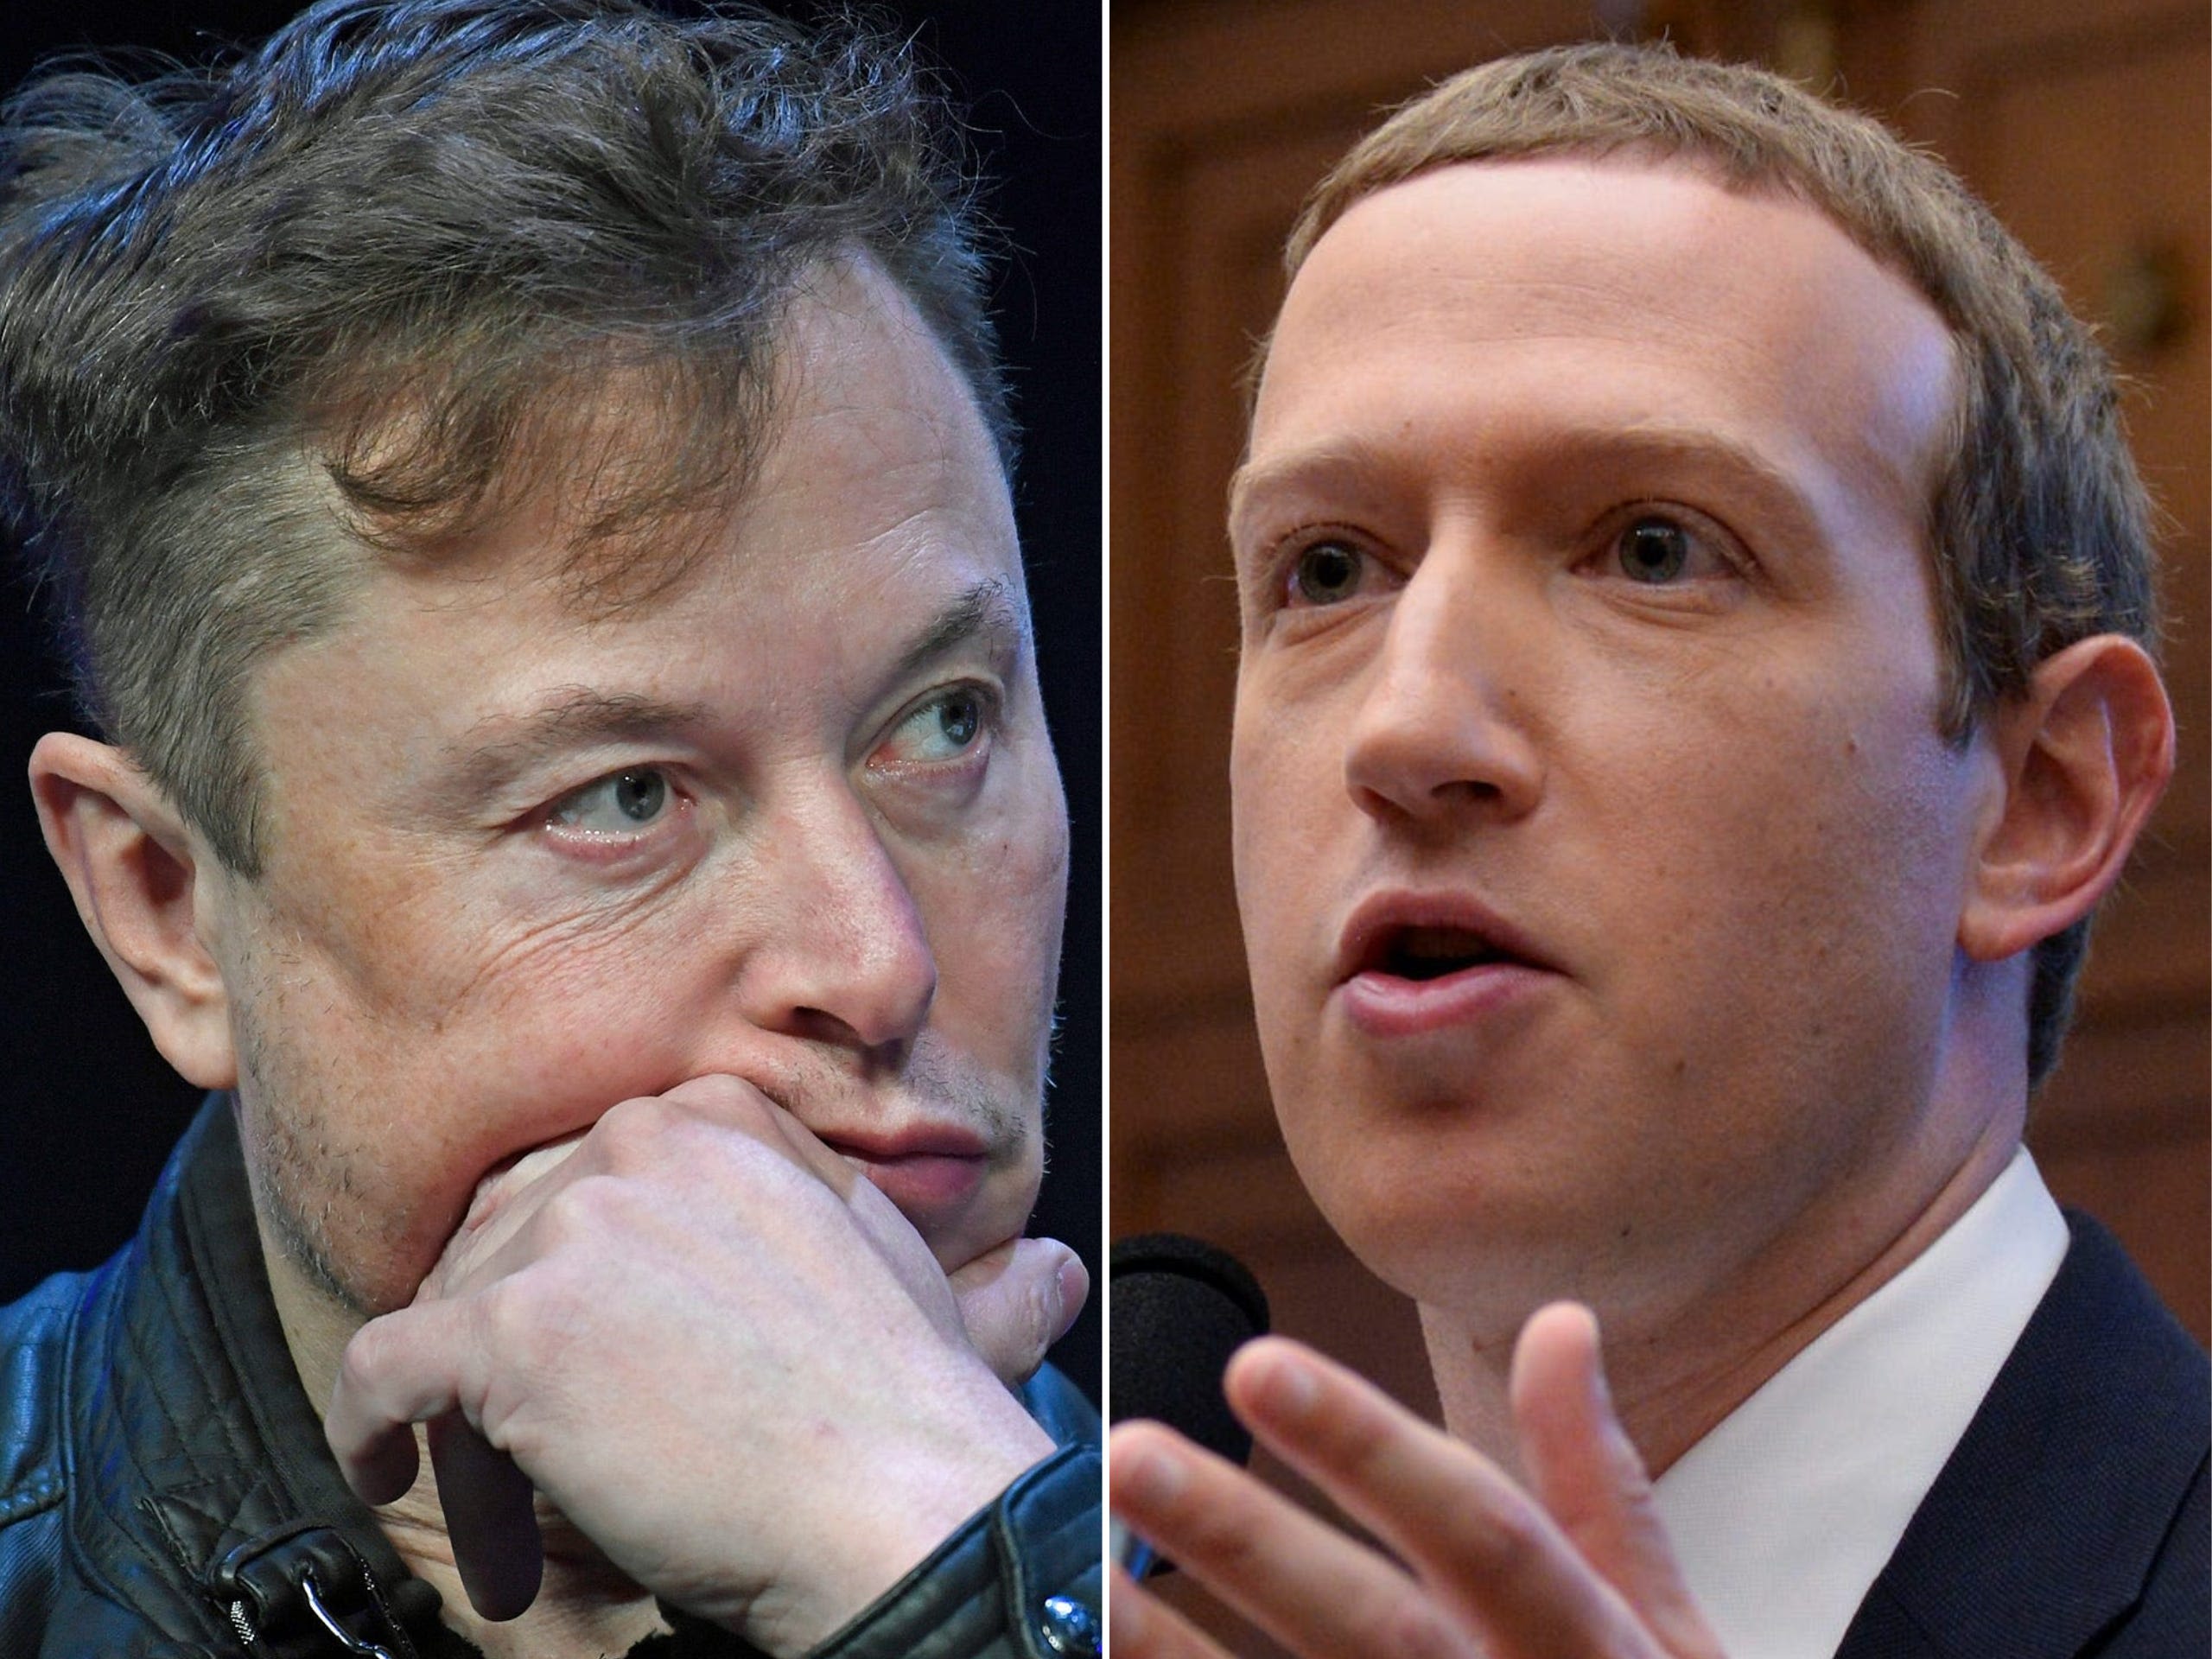 Inside the nearly 8-year-long feud between Elon Musk and Mark Zuckerberg that has threatened to become physical